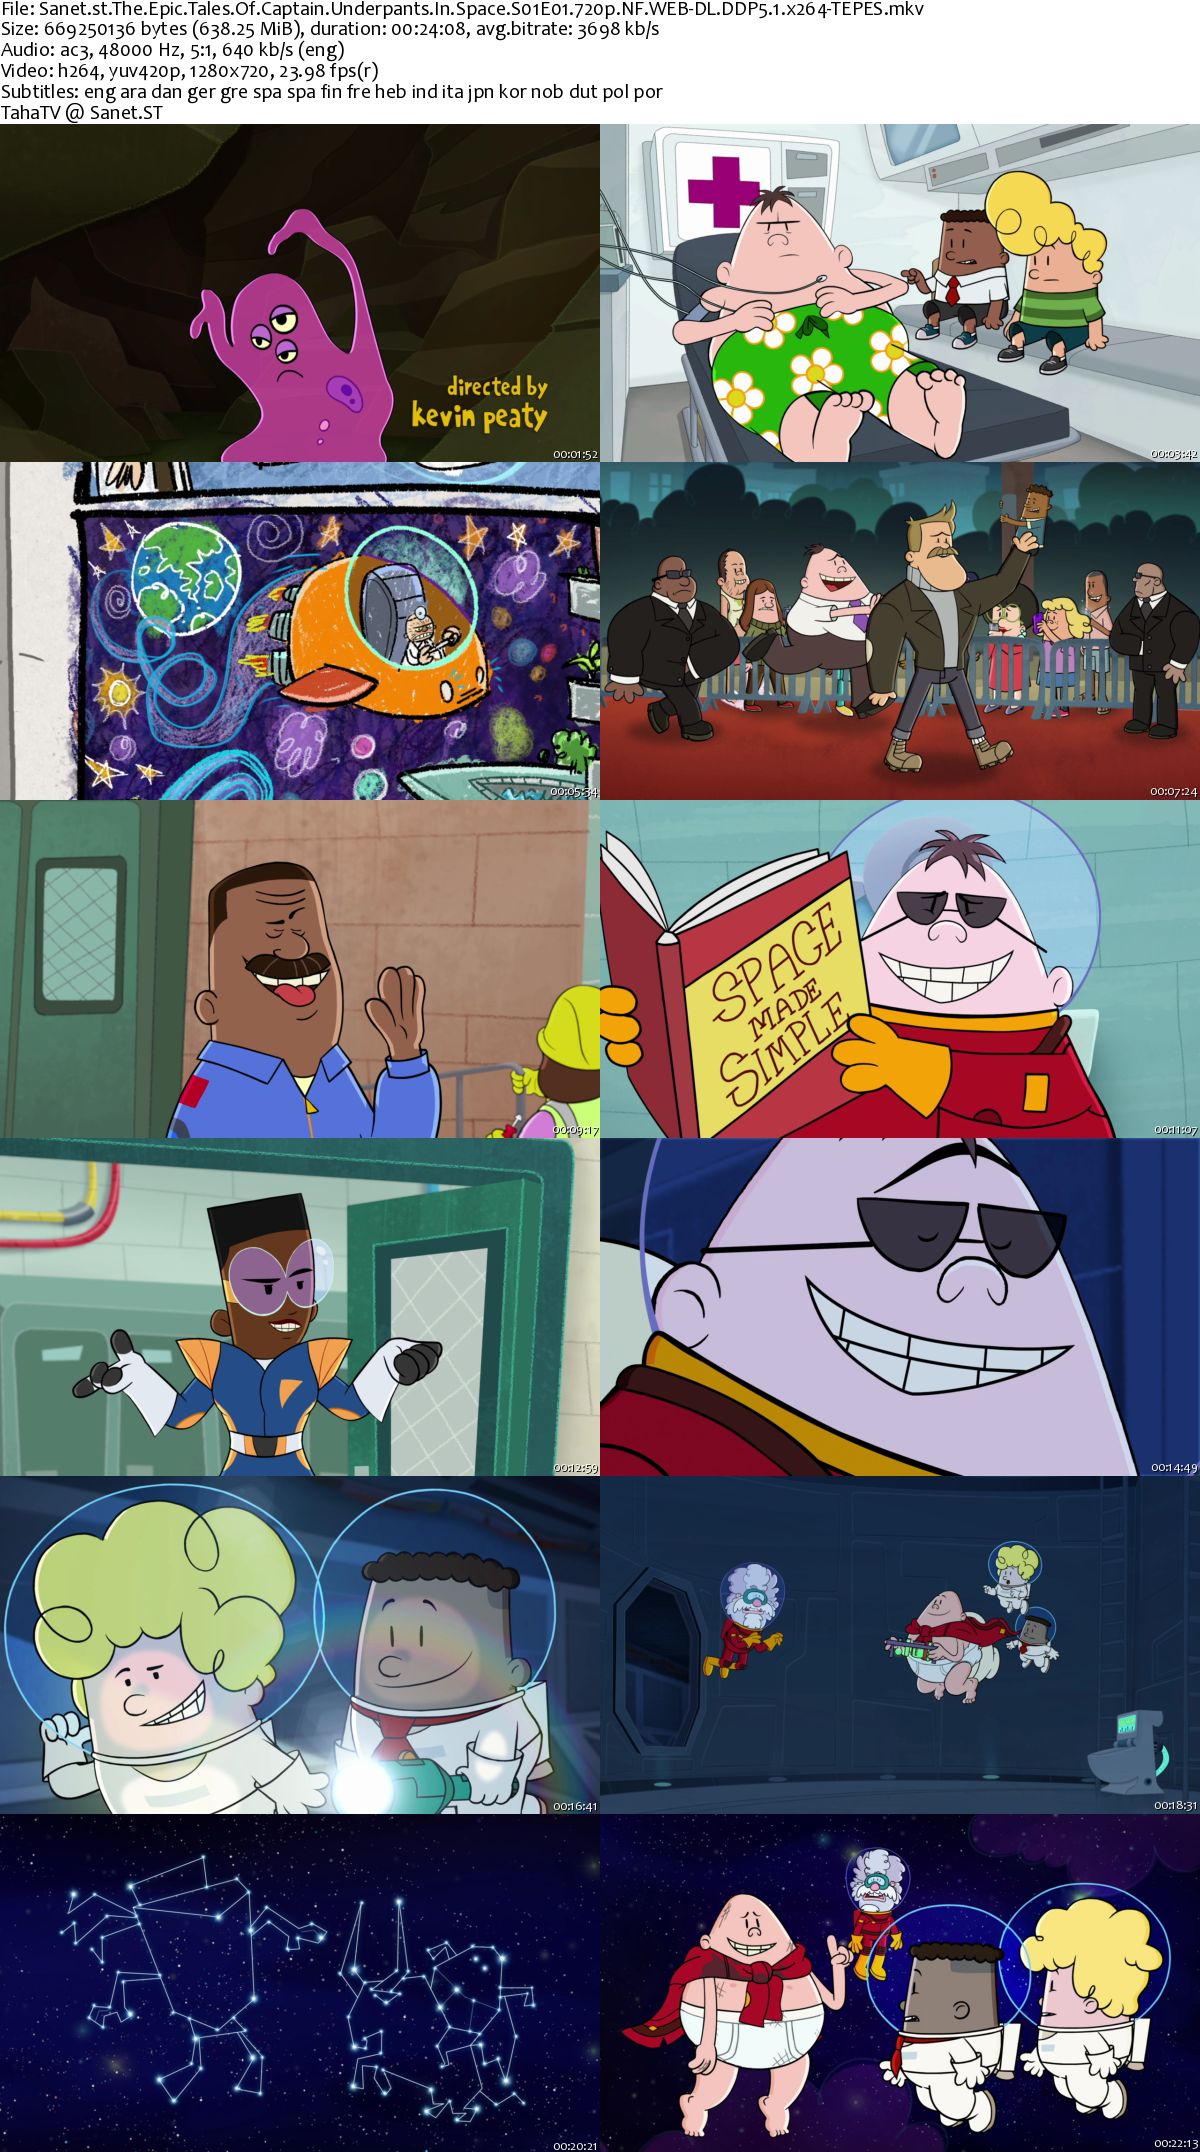 The Epic Tales Of Captain Underpants In Space S01 720p NF WEBRip DDP5.1